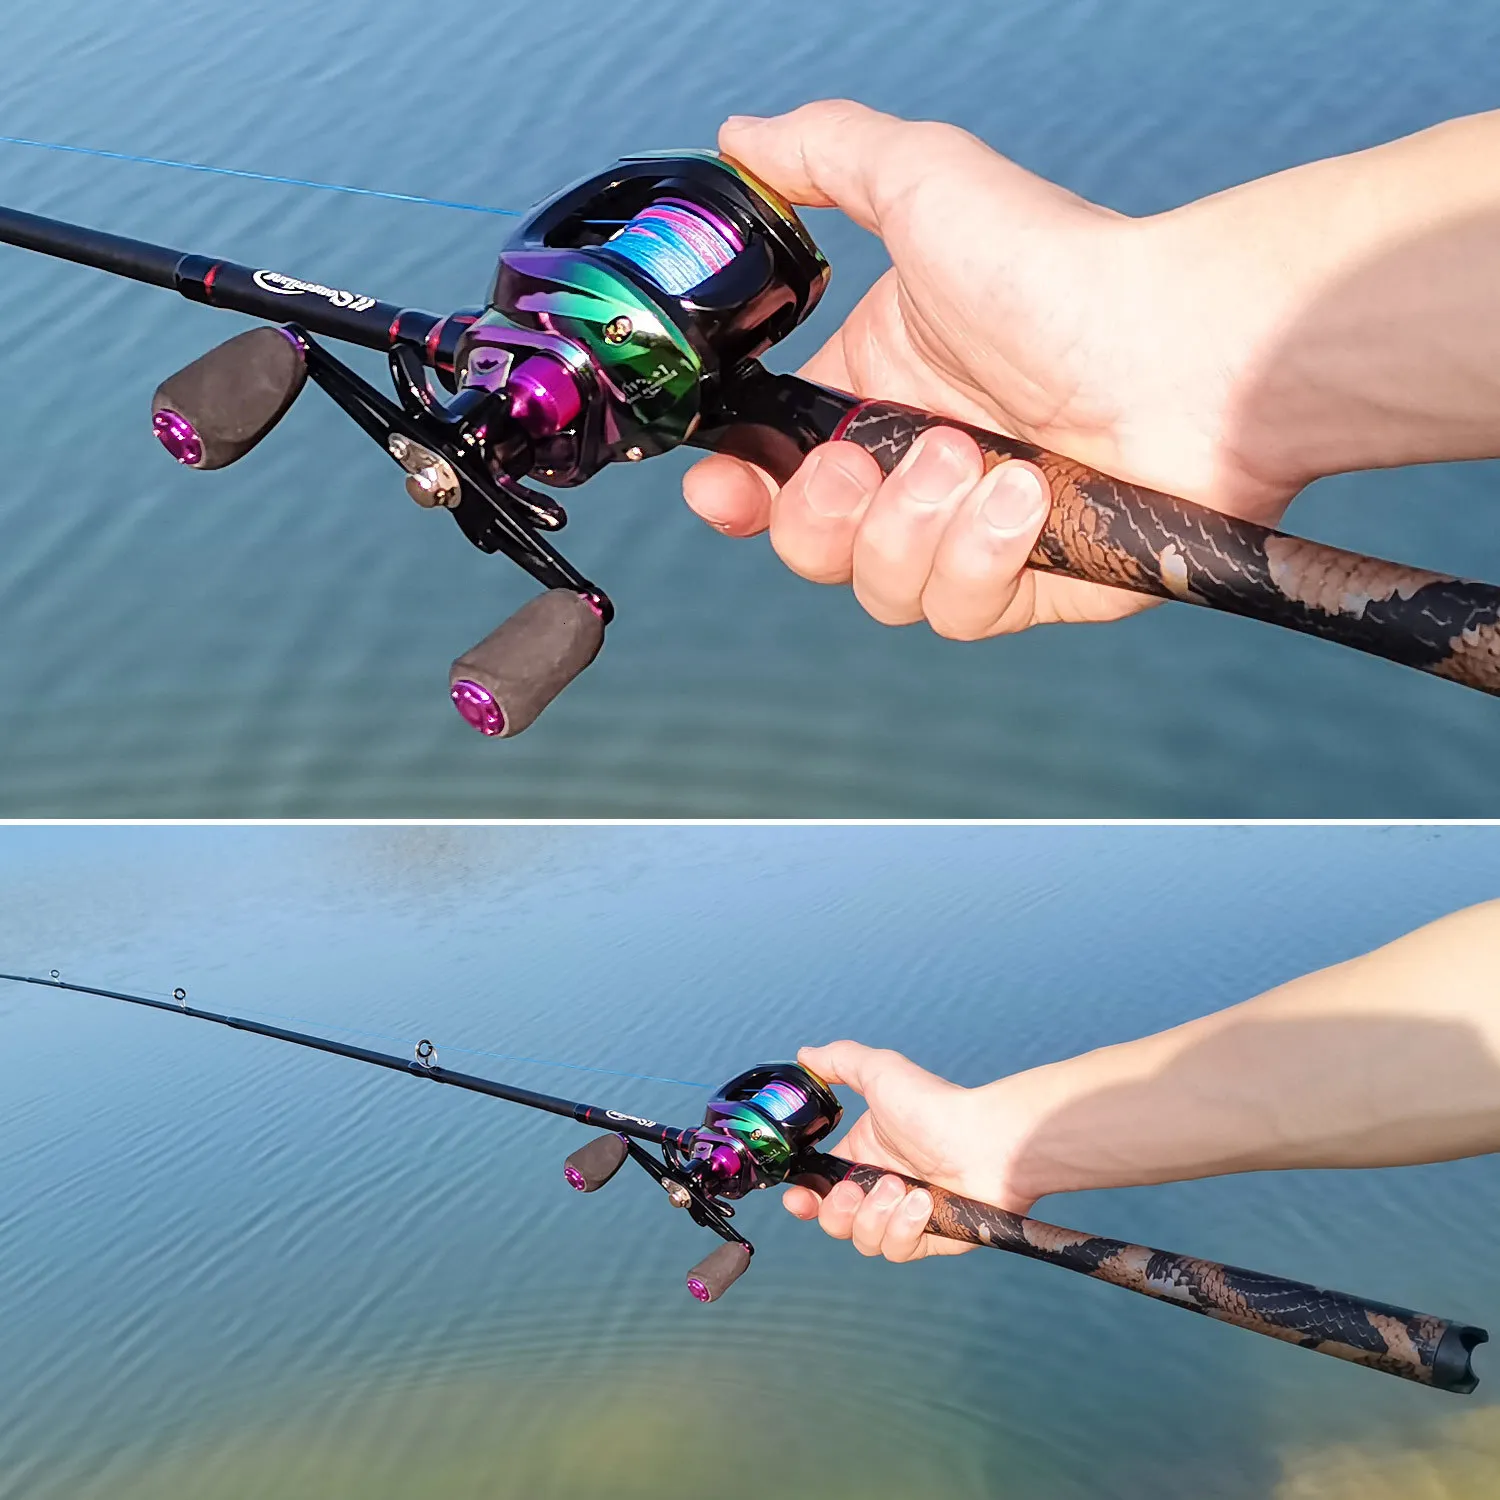 Sougayilang 2.1m UltraLight Carbon Fiber Fishing Pole With Reel For Bass,  Trout, And Carp Fishing Includes Baitcasting Set 230609 From Ren05, $31.74